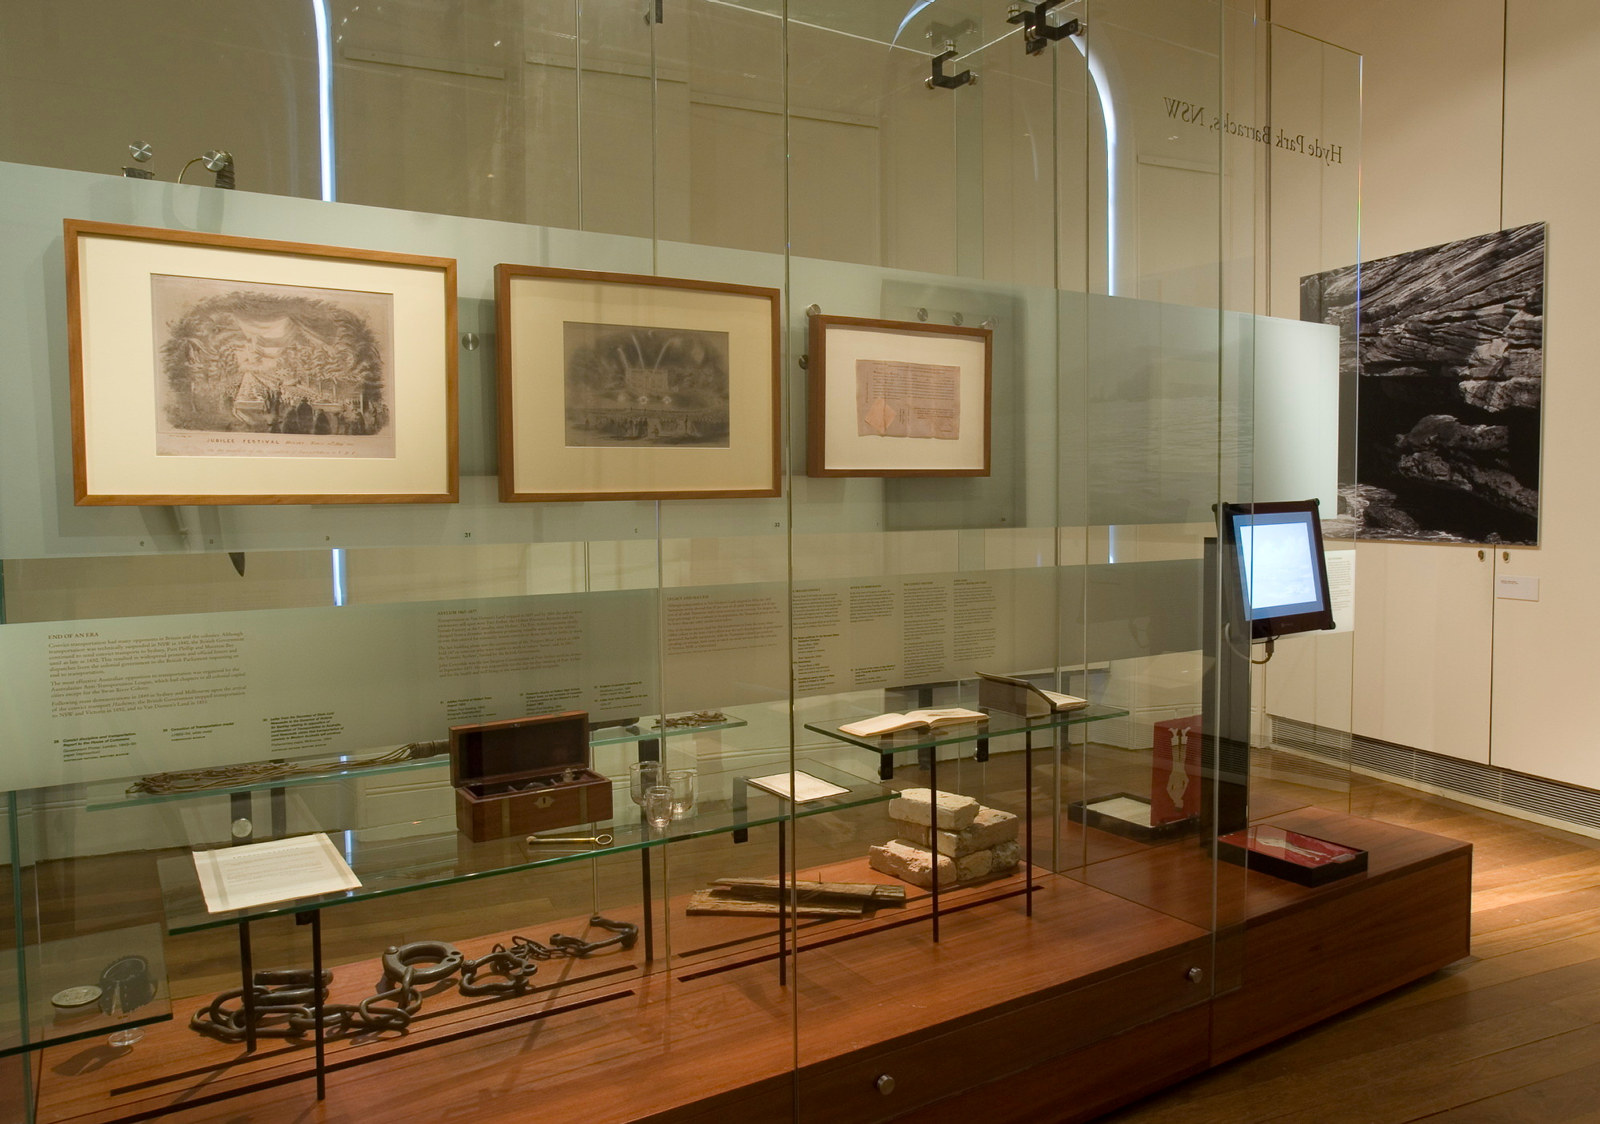 Documentation of Convicts: sites of punishment exhibition showing frames works and objects